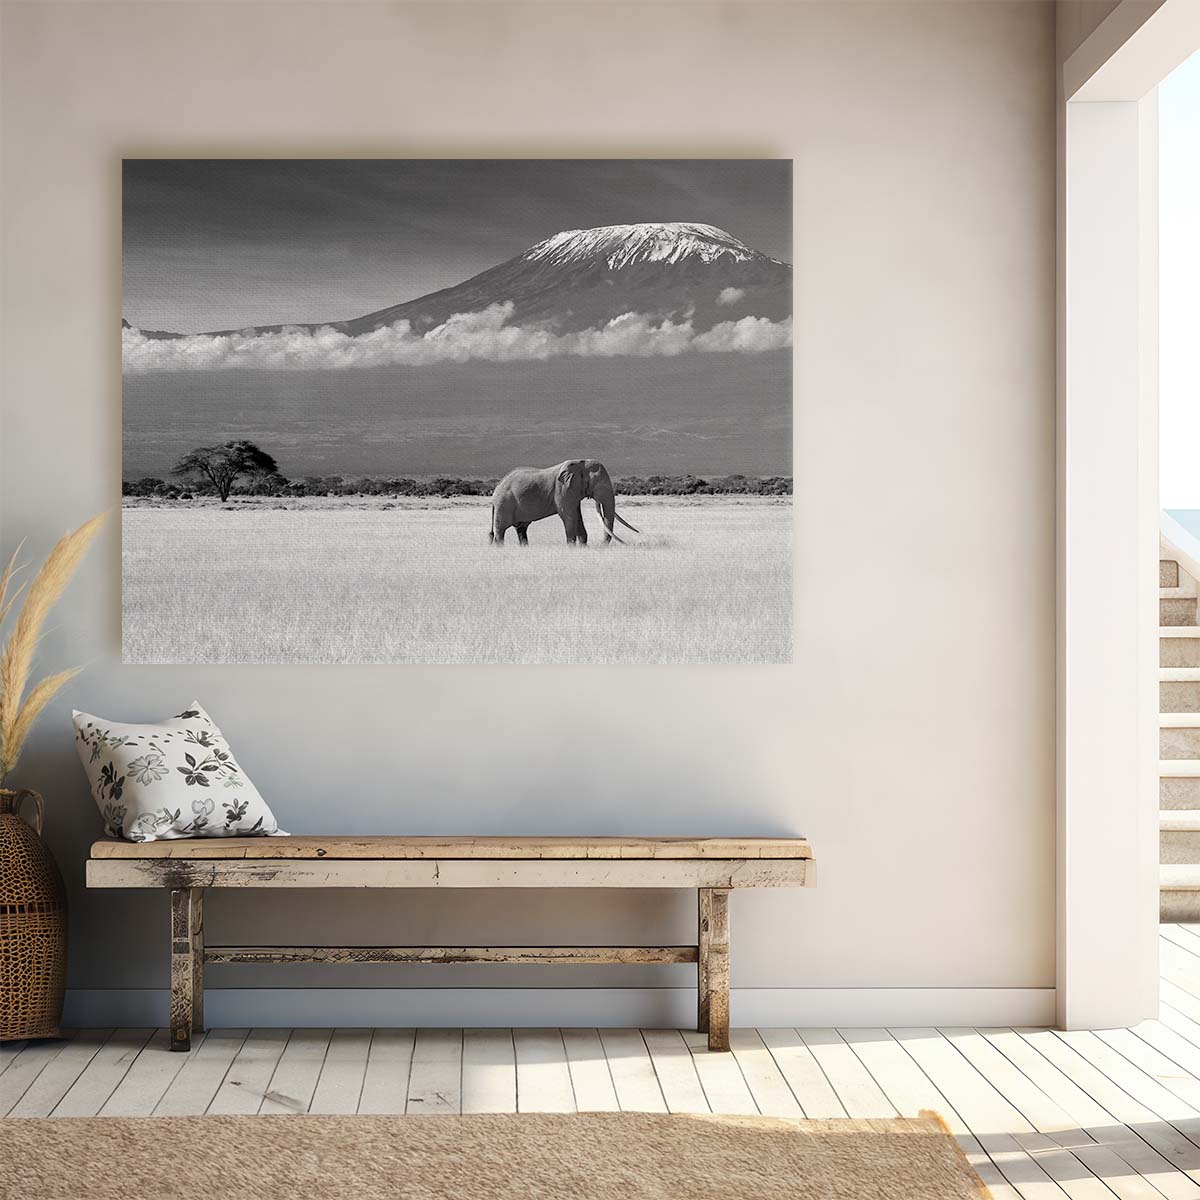 Majestic African Elephant & Kilimanjaro Wall Art by Luxuriance Designs. Made in USA.